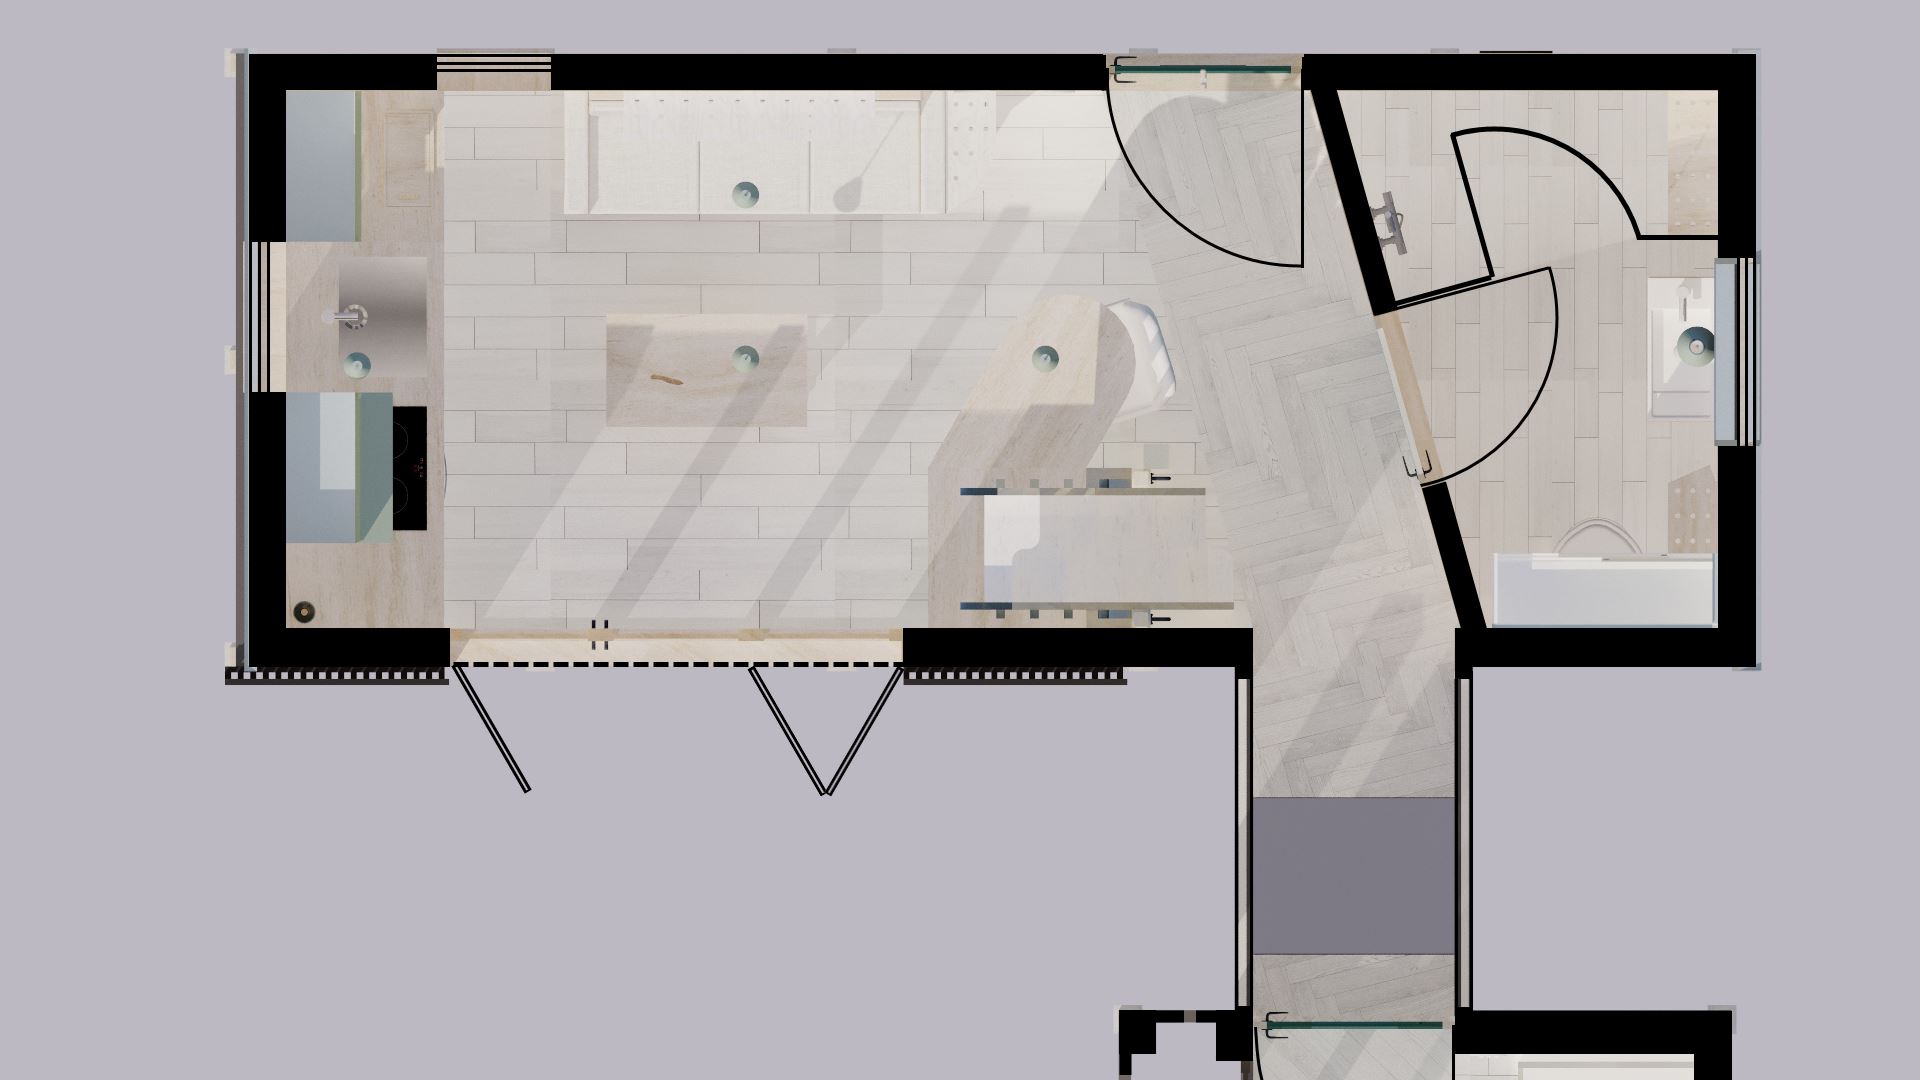 A plan view of the ground floor of the tiny house.